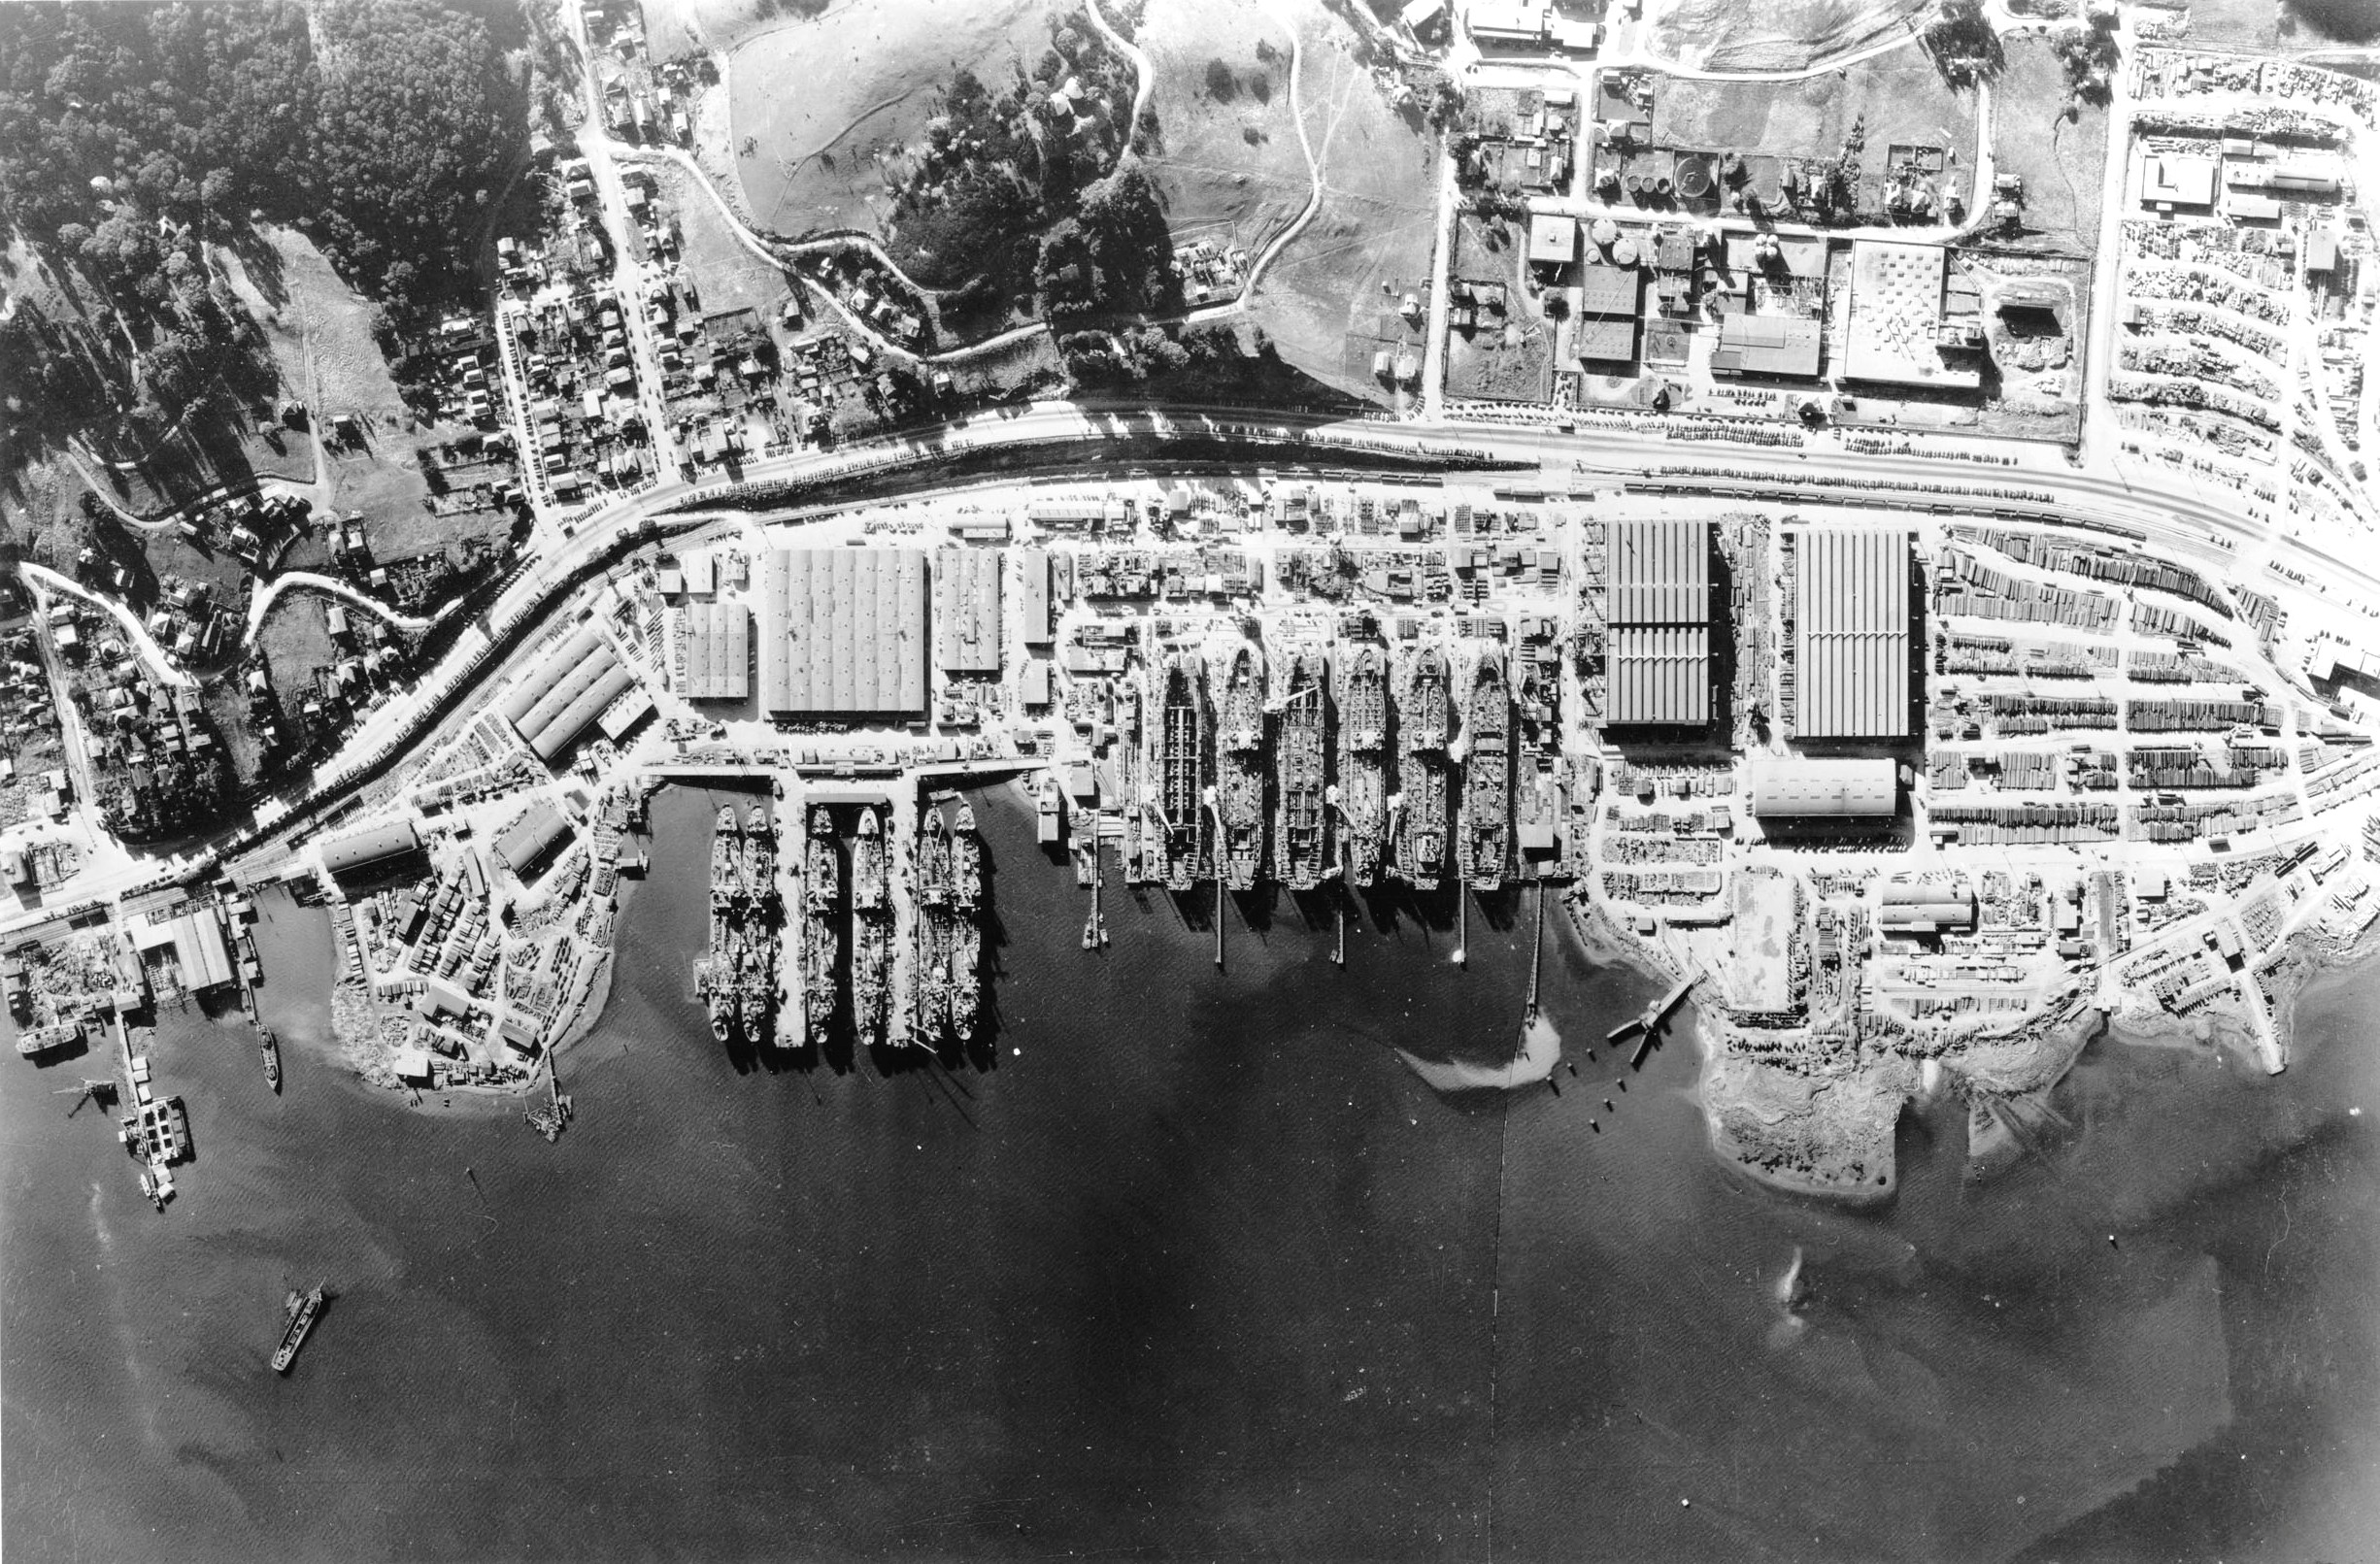 Aerial view of the Marinship Shipbuilding yard, Sausalito, California, United States, 6 Dec 1944. Note the six tankers under construction on the ways and six others being fitted out at the piers. Photo 5 of 5.